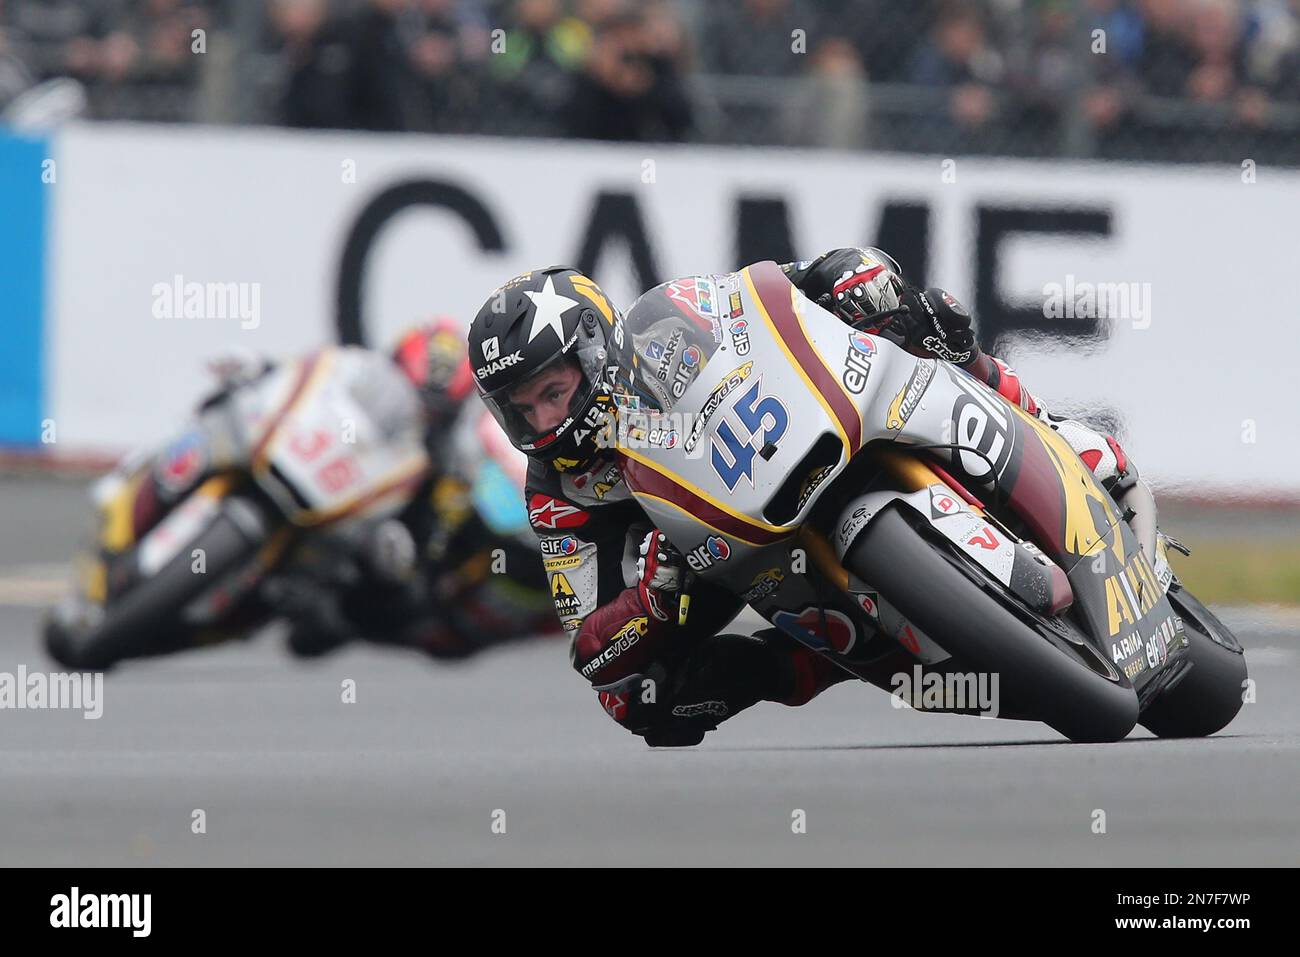 Moto2 rider Scott Redding of Great Britain powers his Kalex in a curve  ahead of Mika Kallio of Finland during the French Grand Prix, in Le Mans,  western France, Sunday, May 19,